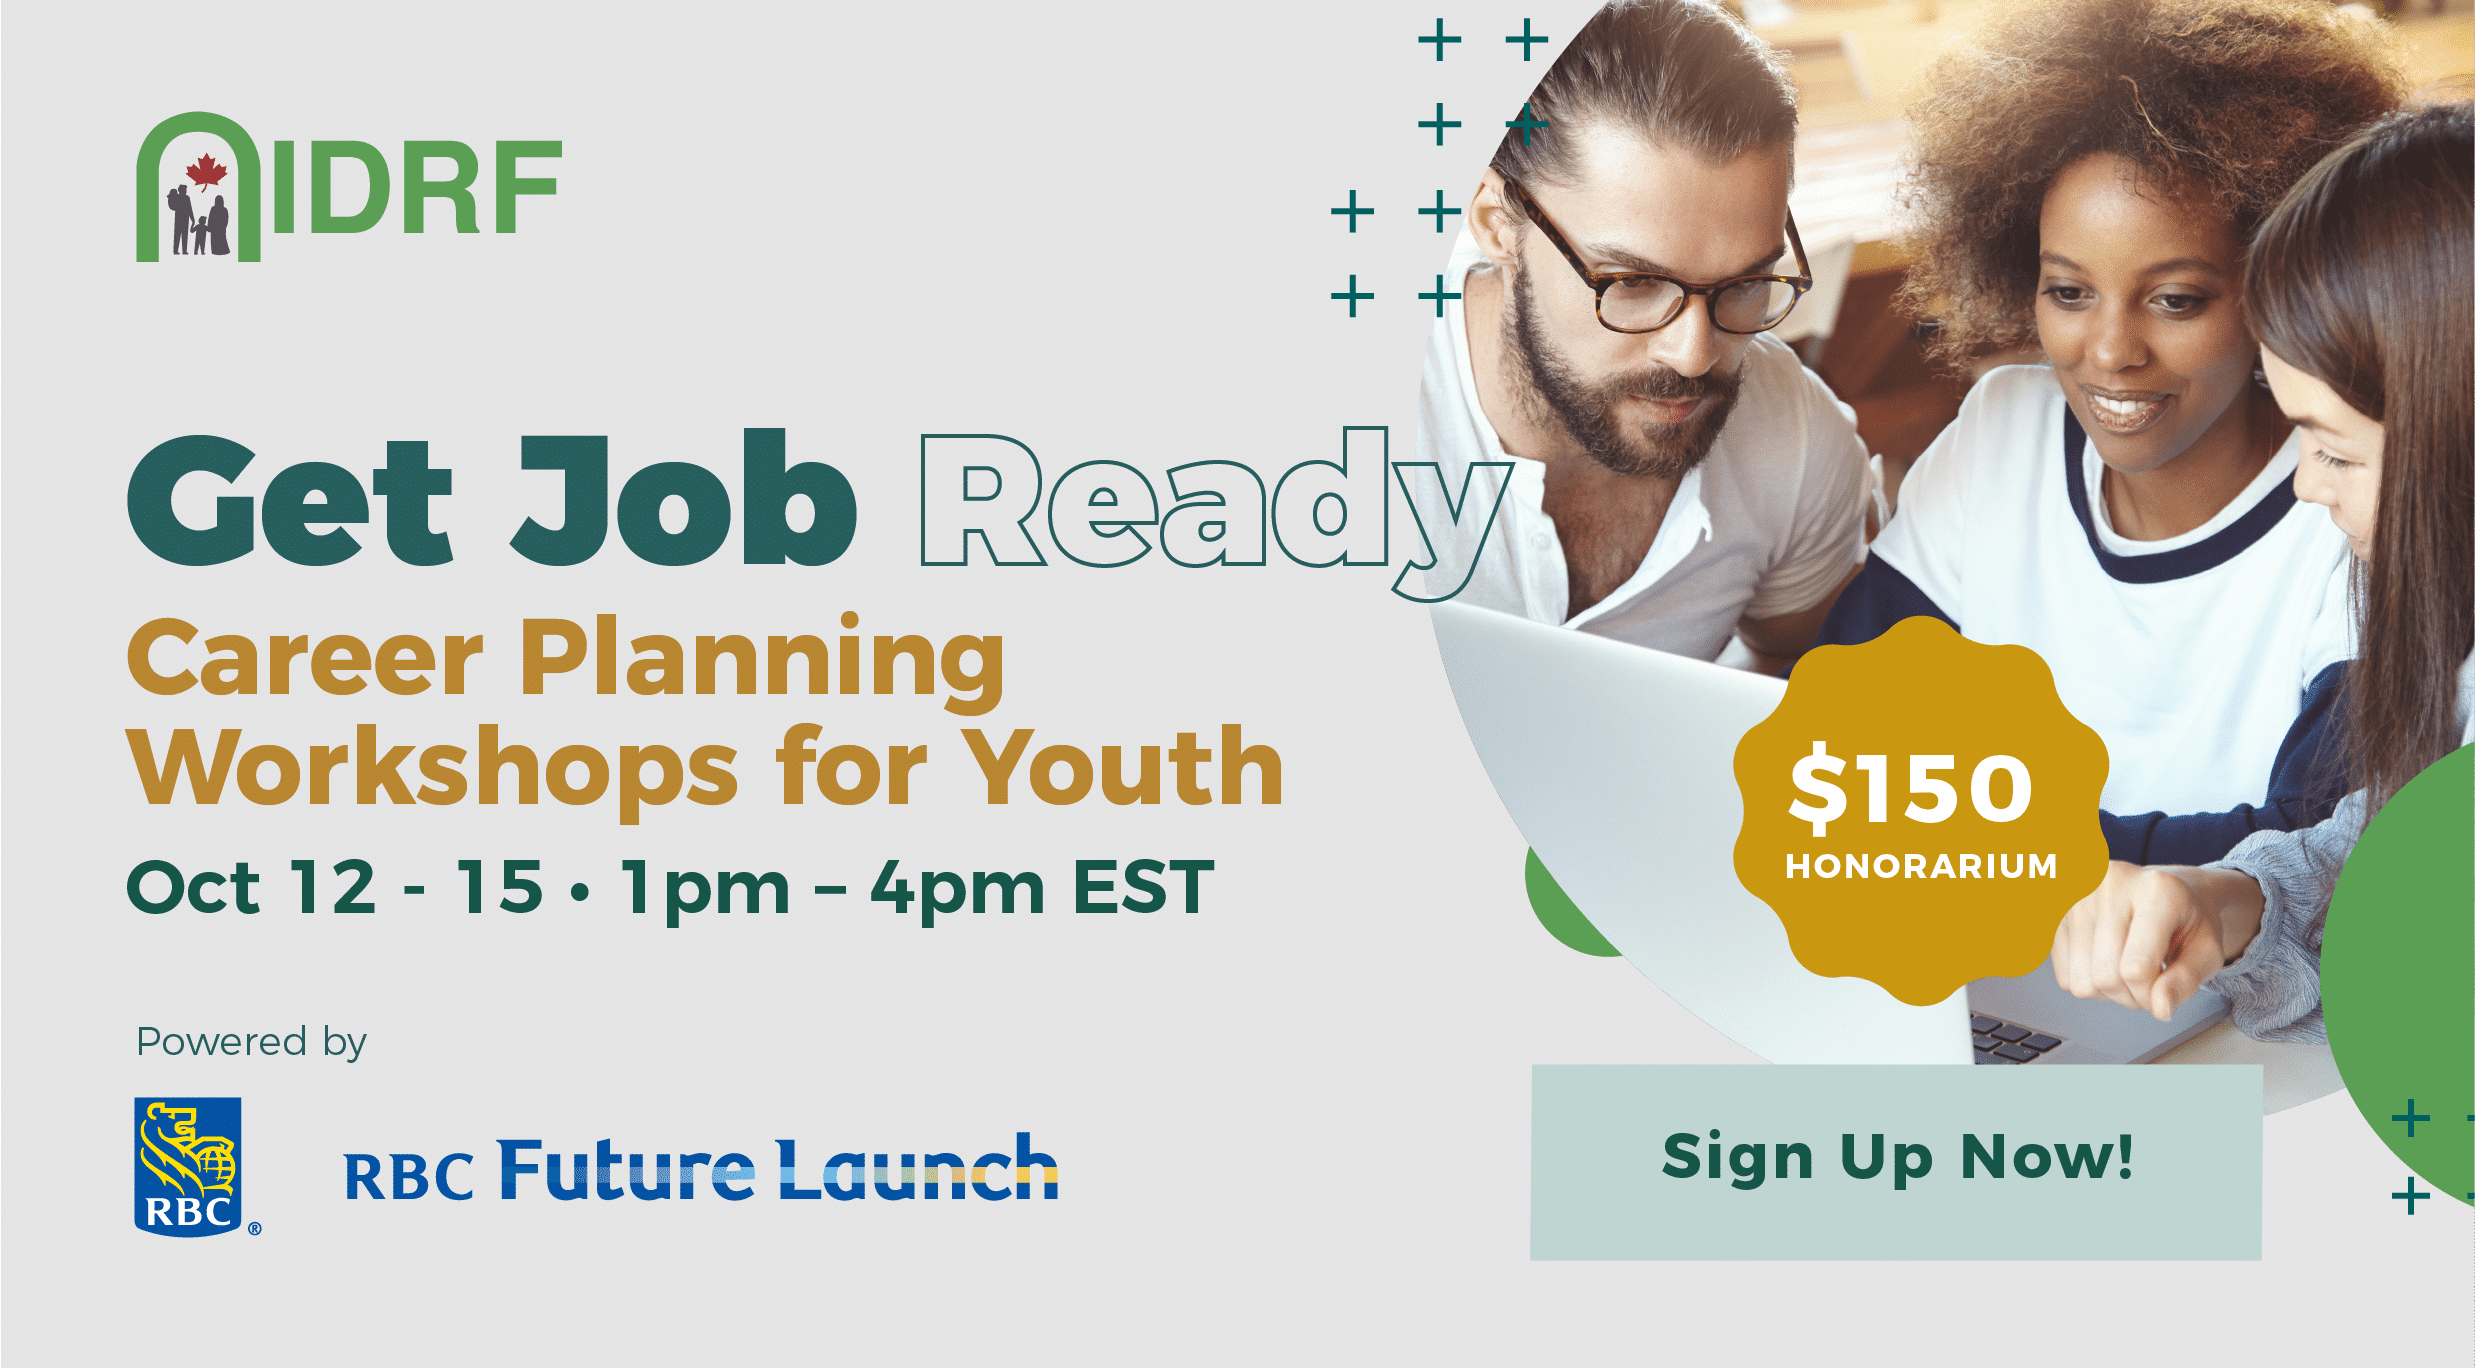 Get Job Ready - Career Planning Workshops for Youth